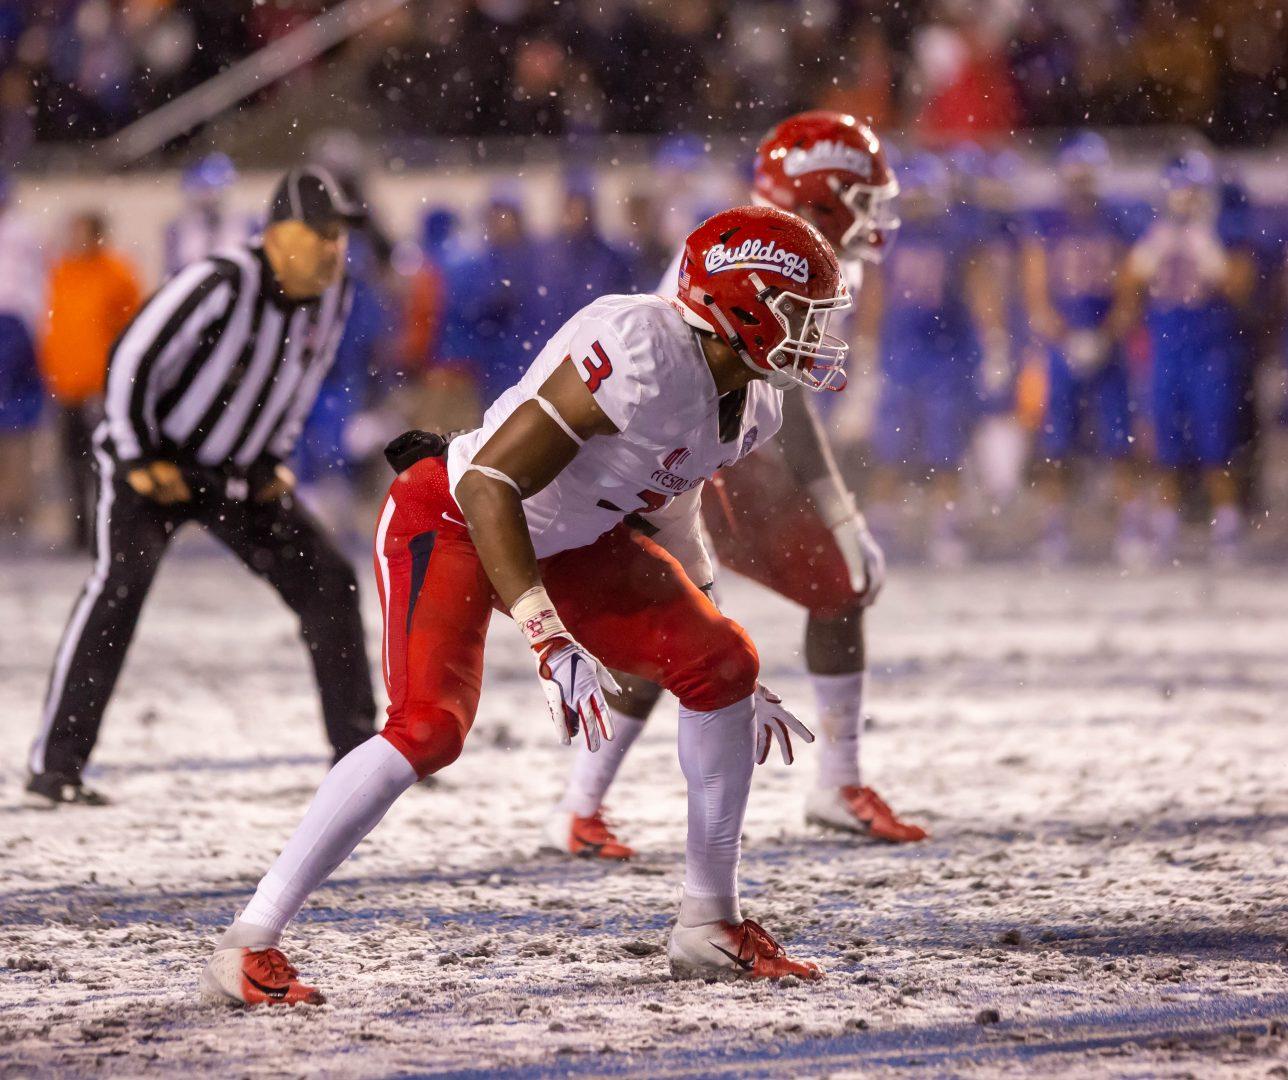 Fresno State defensive end Mykal Walker lines up before a play in the Bulldogs 19-16 victory over Boise State in the Mountain West championship game on Dec. 1, 2018. (Jose Romo/The Collegian)